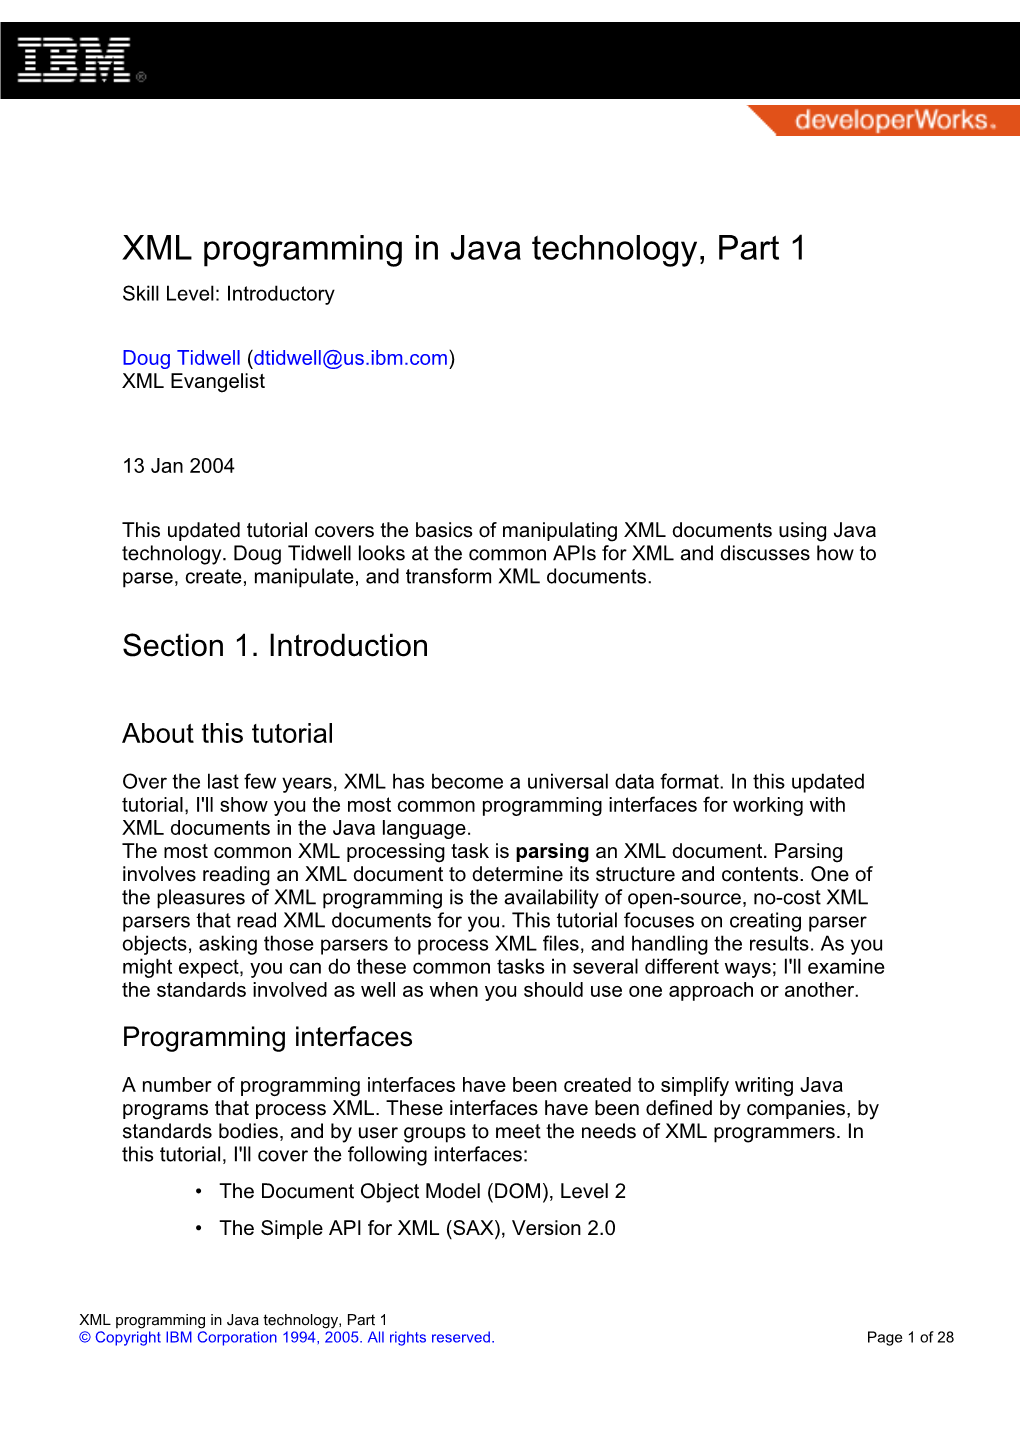 XML Programming in Java Technology, Part 1 Skill Level: Introductory